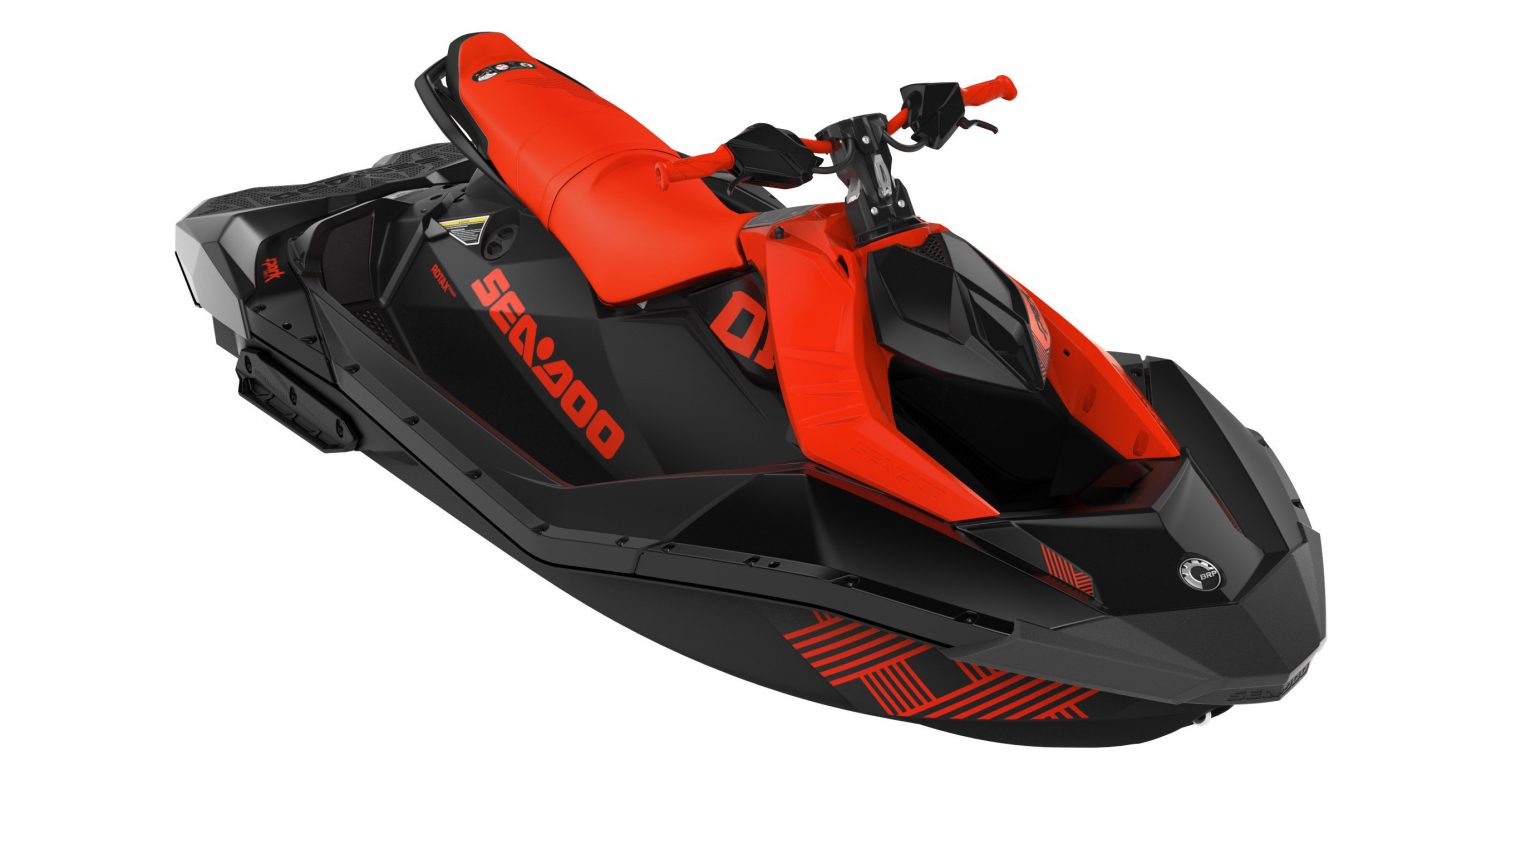 Sea-Doo Spark 3UP: Spacious Seating for Three and Fun for All